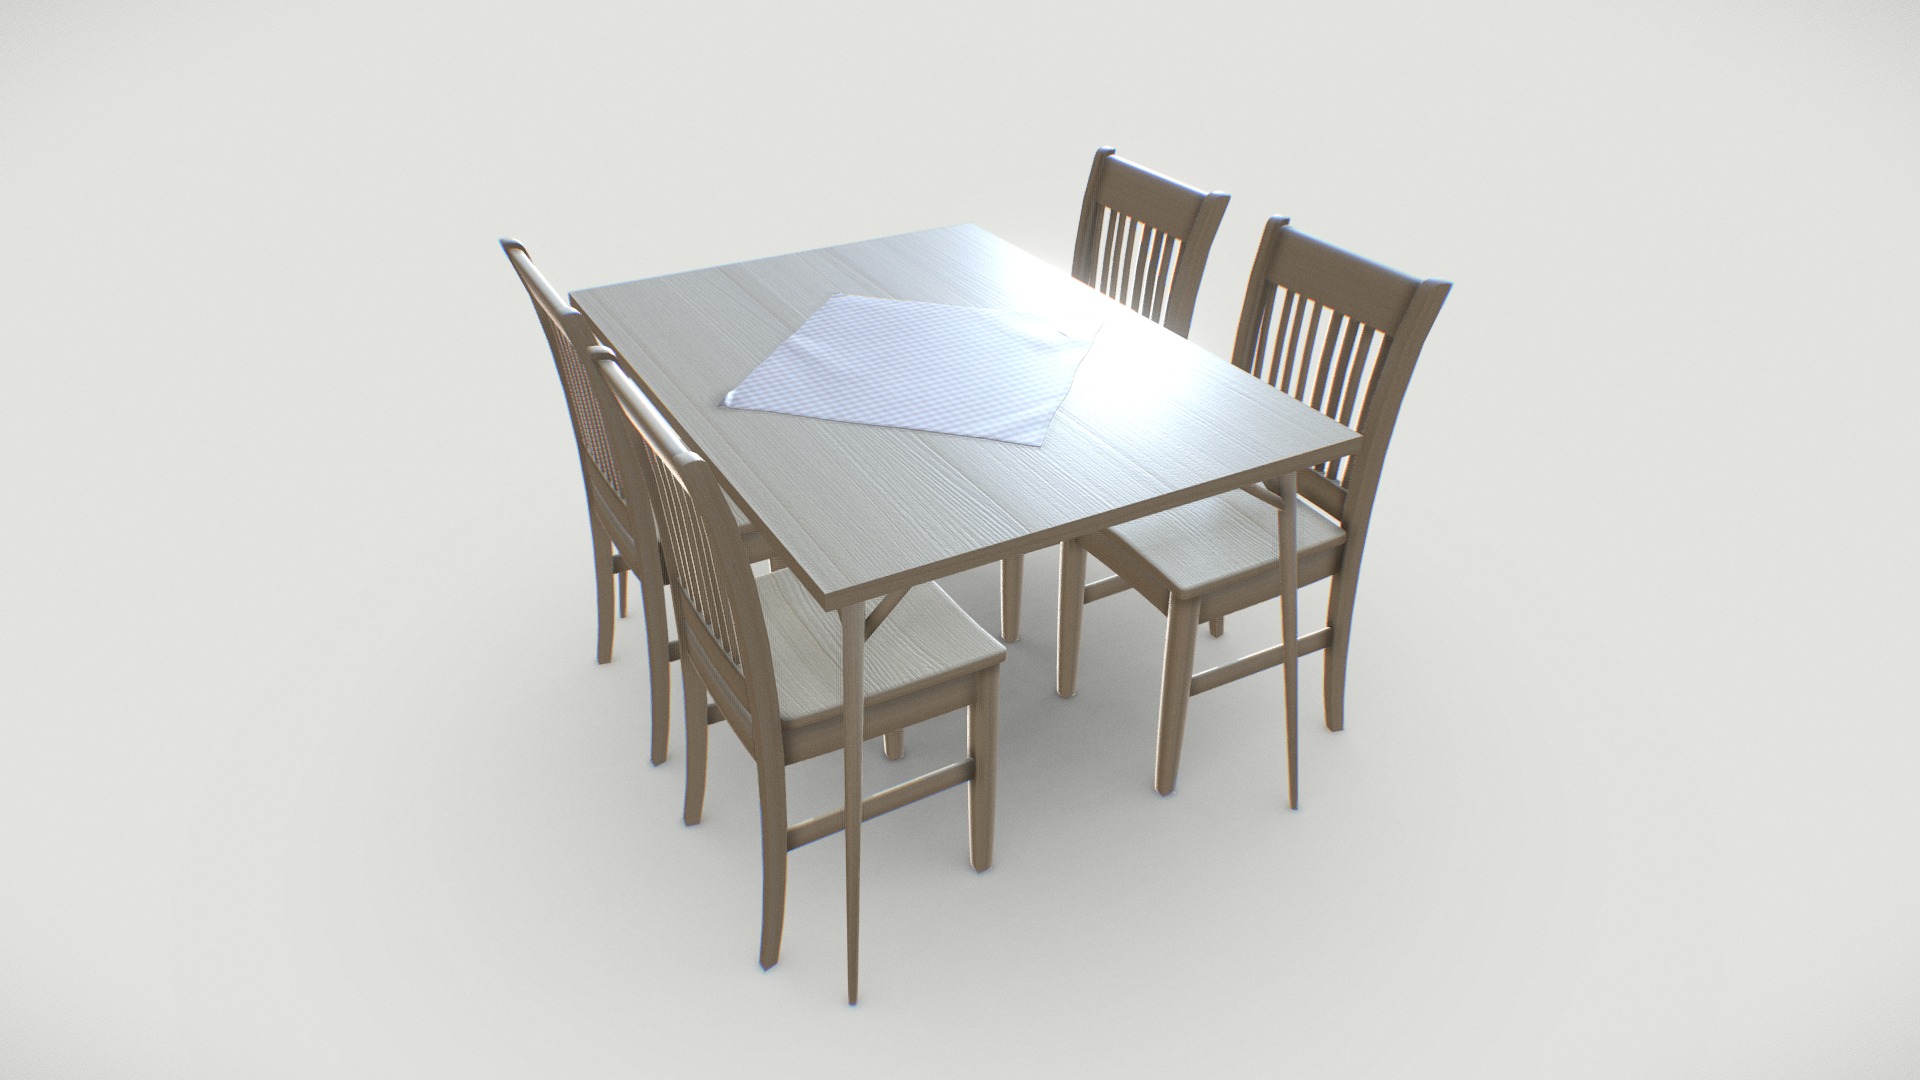 3D model Kitchen Dining Set - This is a 3D model of the Kitchen Dining Set. The 3D model is about a table and chairs.